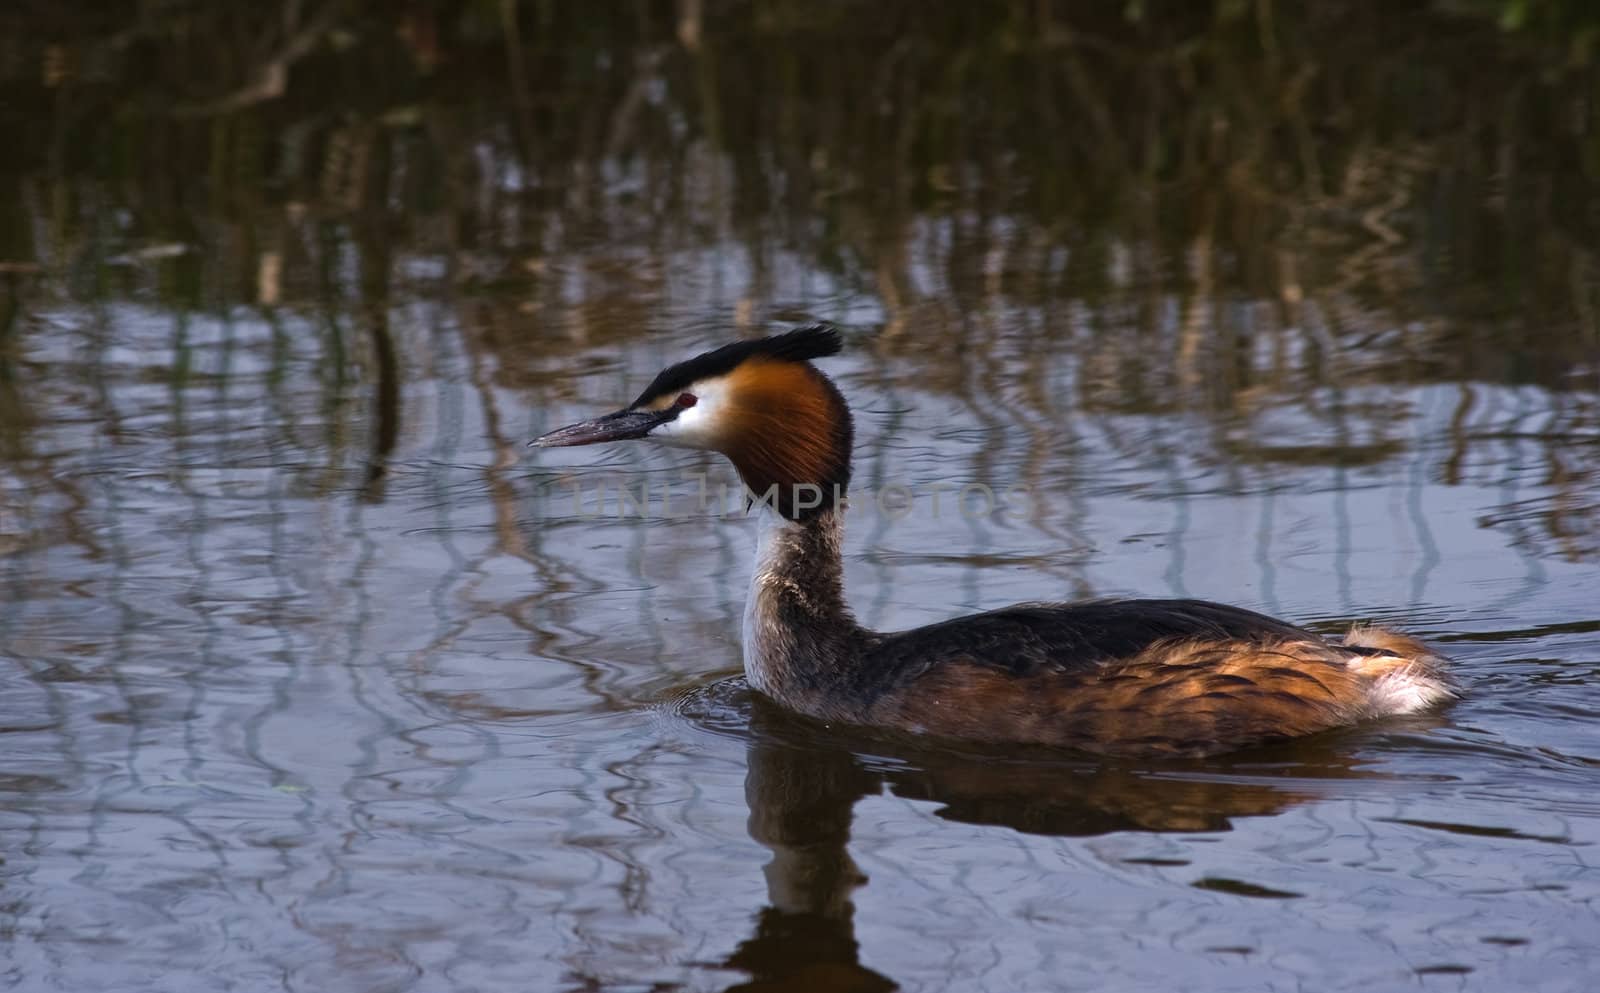 Great crested Grebe swimming in april evening light